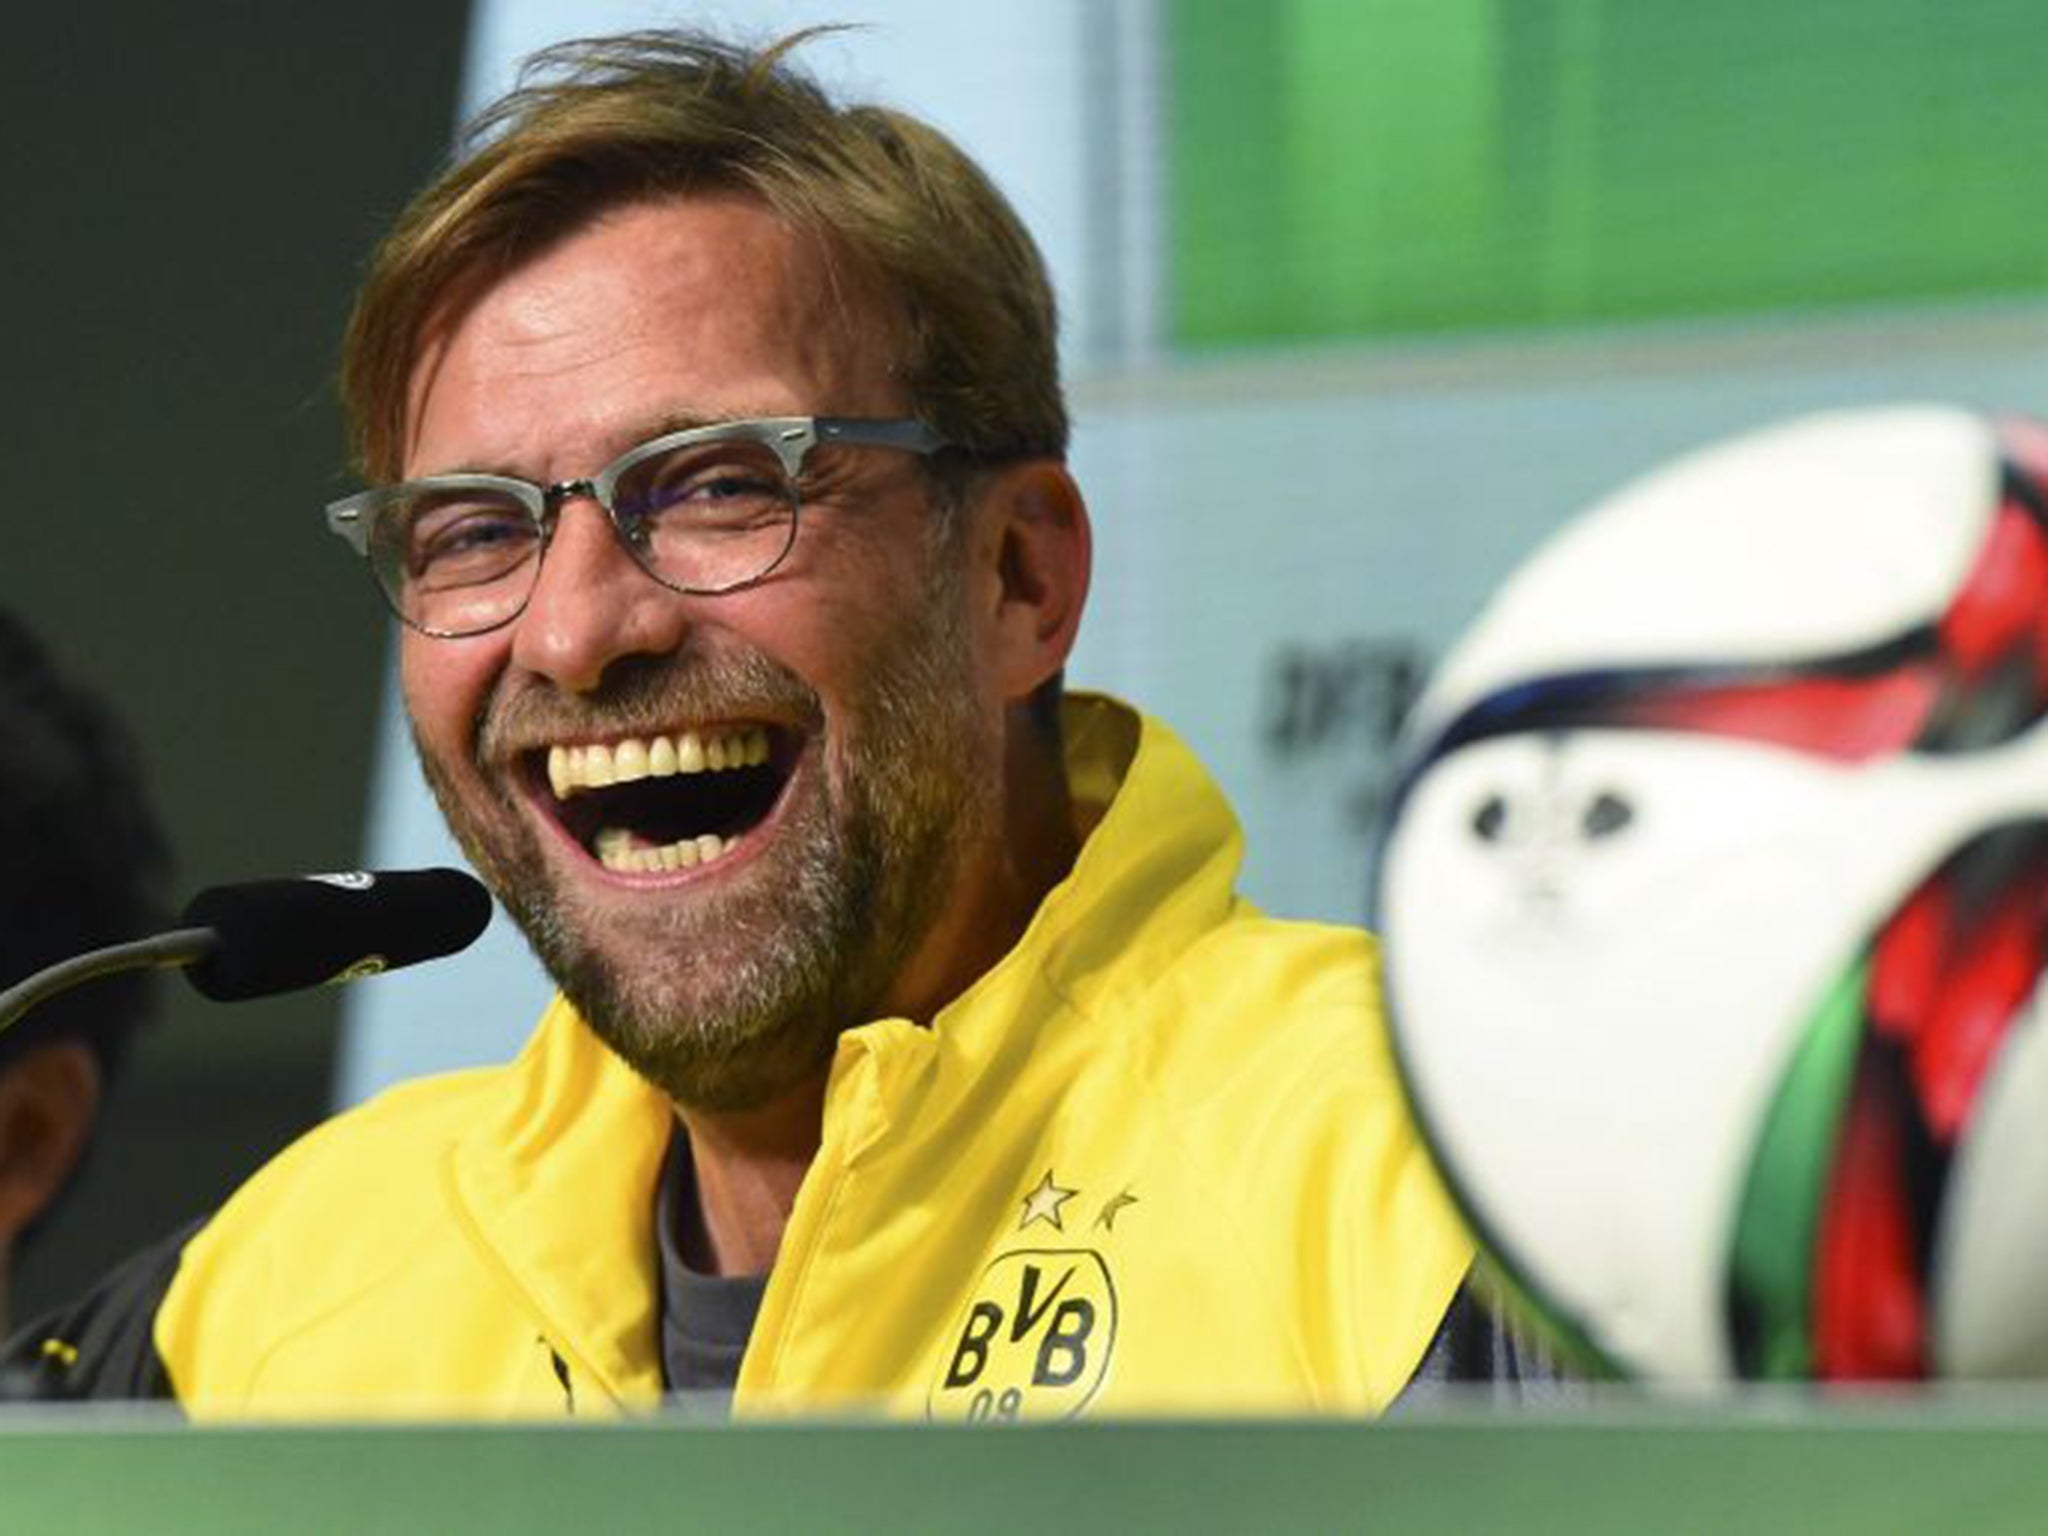 Jurgen Klopp is set to become the new Liverpool manager